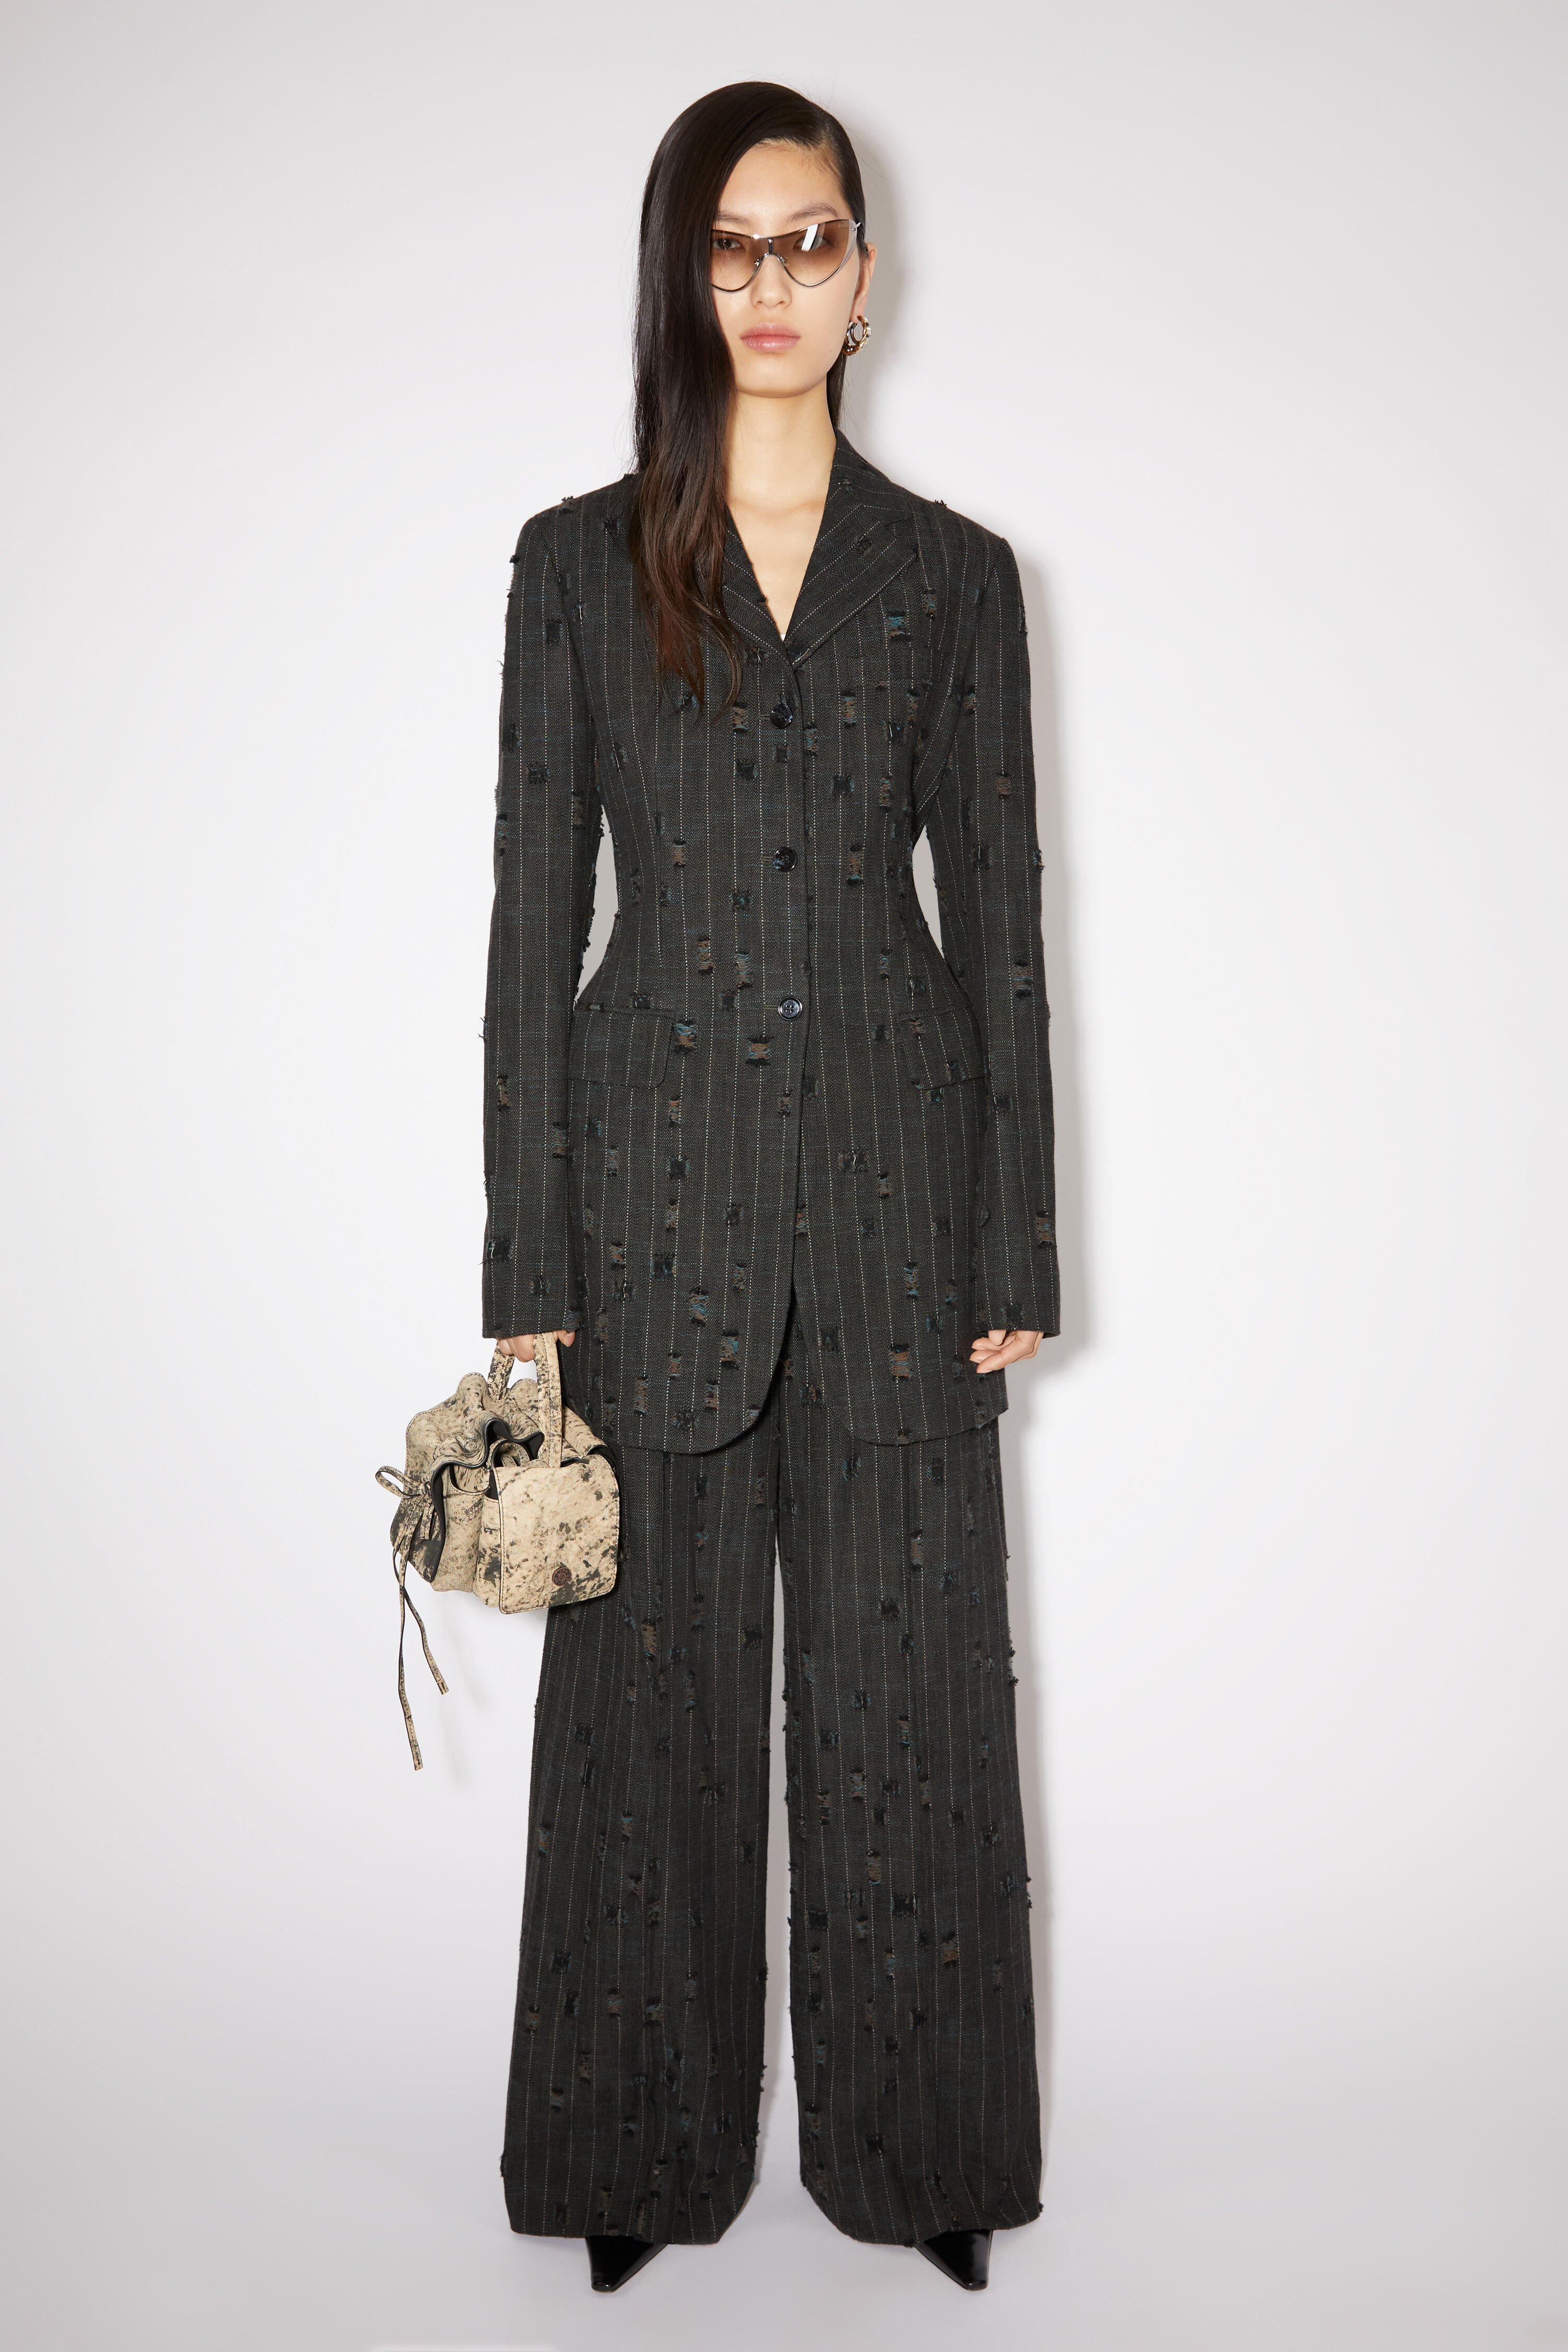 Acne Studios - Fitted suit jacket - Anthracite grey